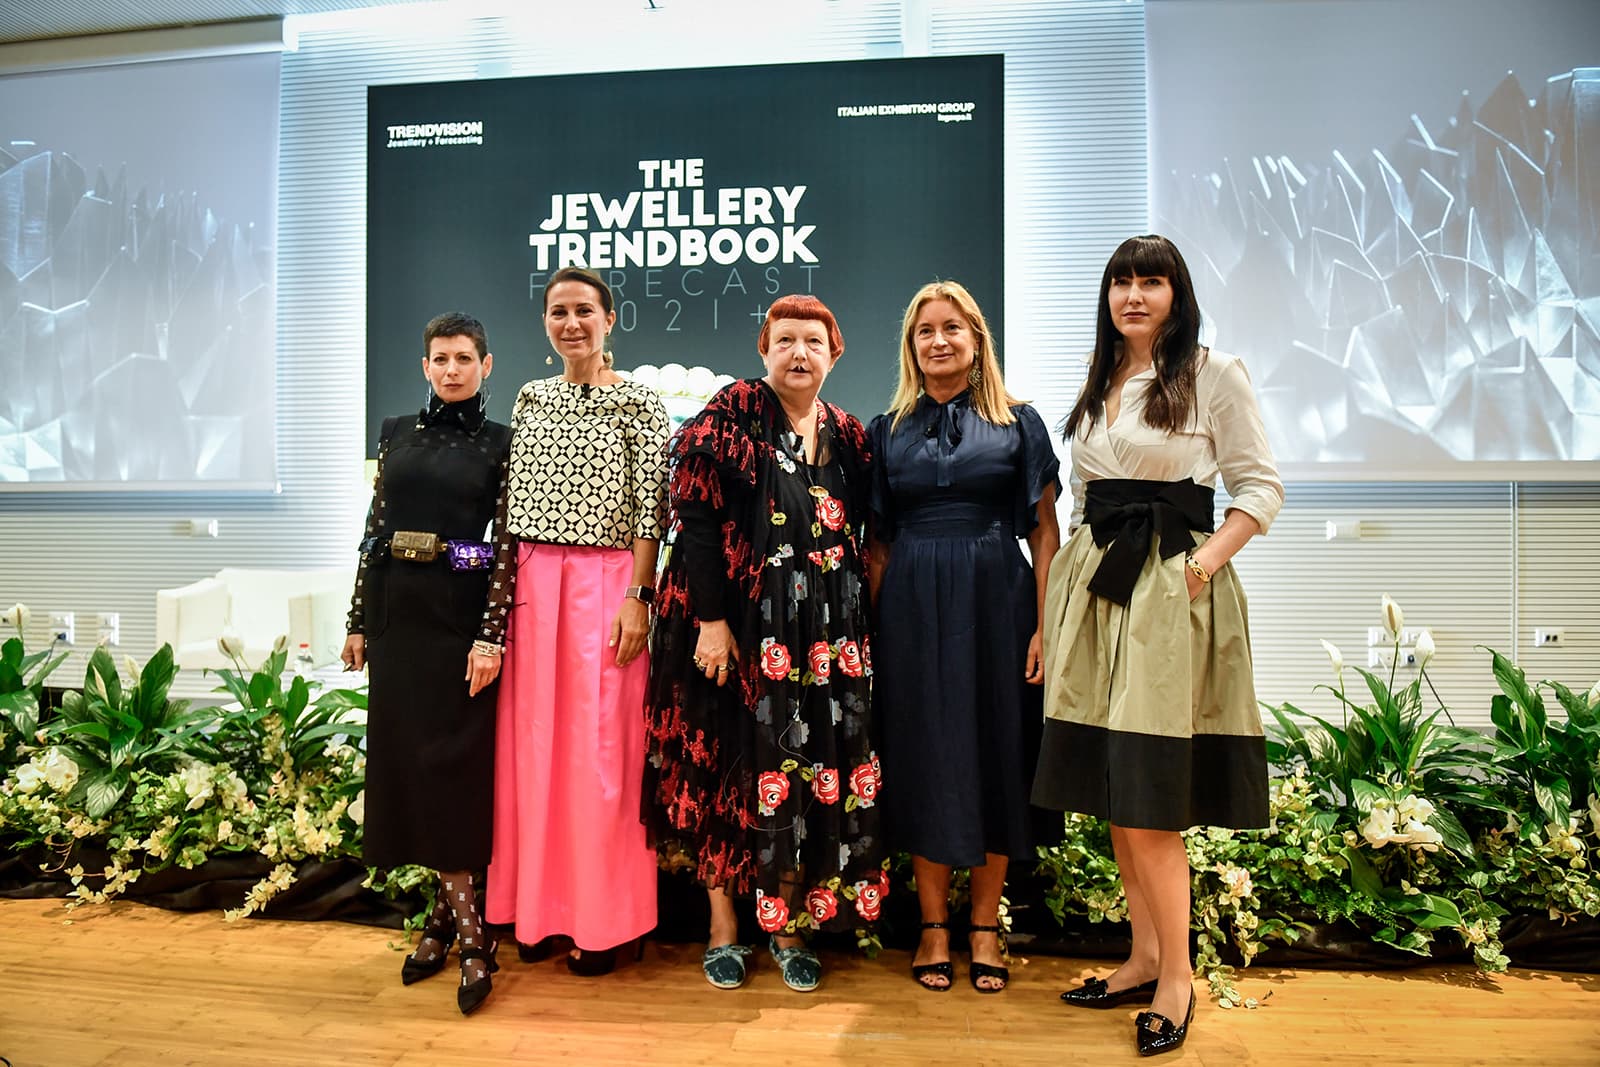 The panel of the TrendVision 2021 VicenzaOro talk with (left to right) Lauren Kulchinsky Levison, Paola de Luca, Lynn Yaeger, Alba Cappelieri and Katerina Perez